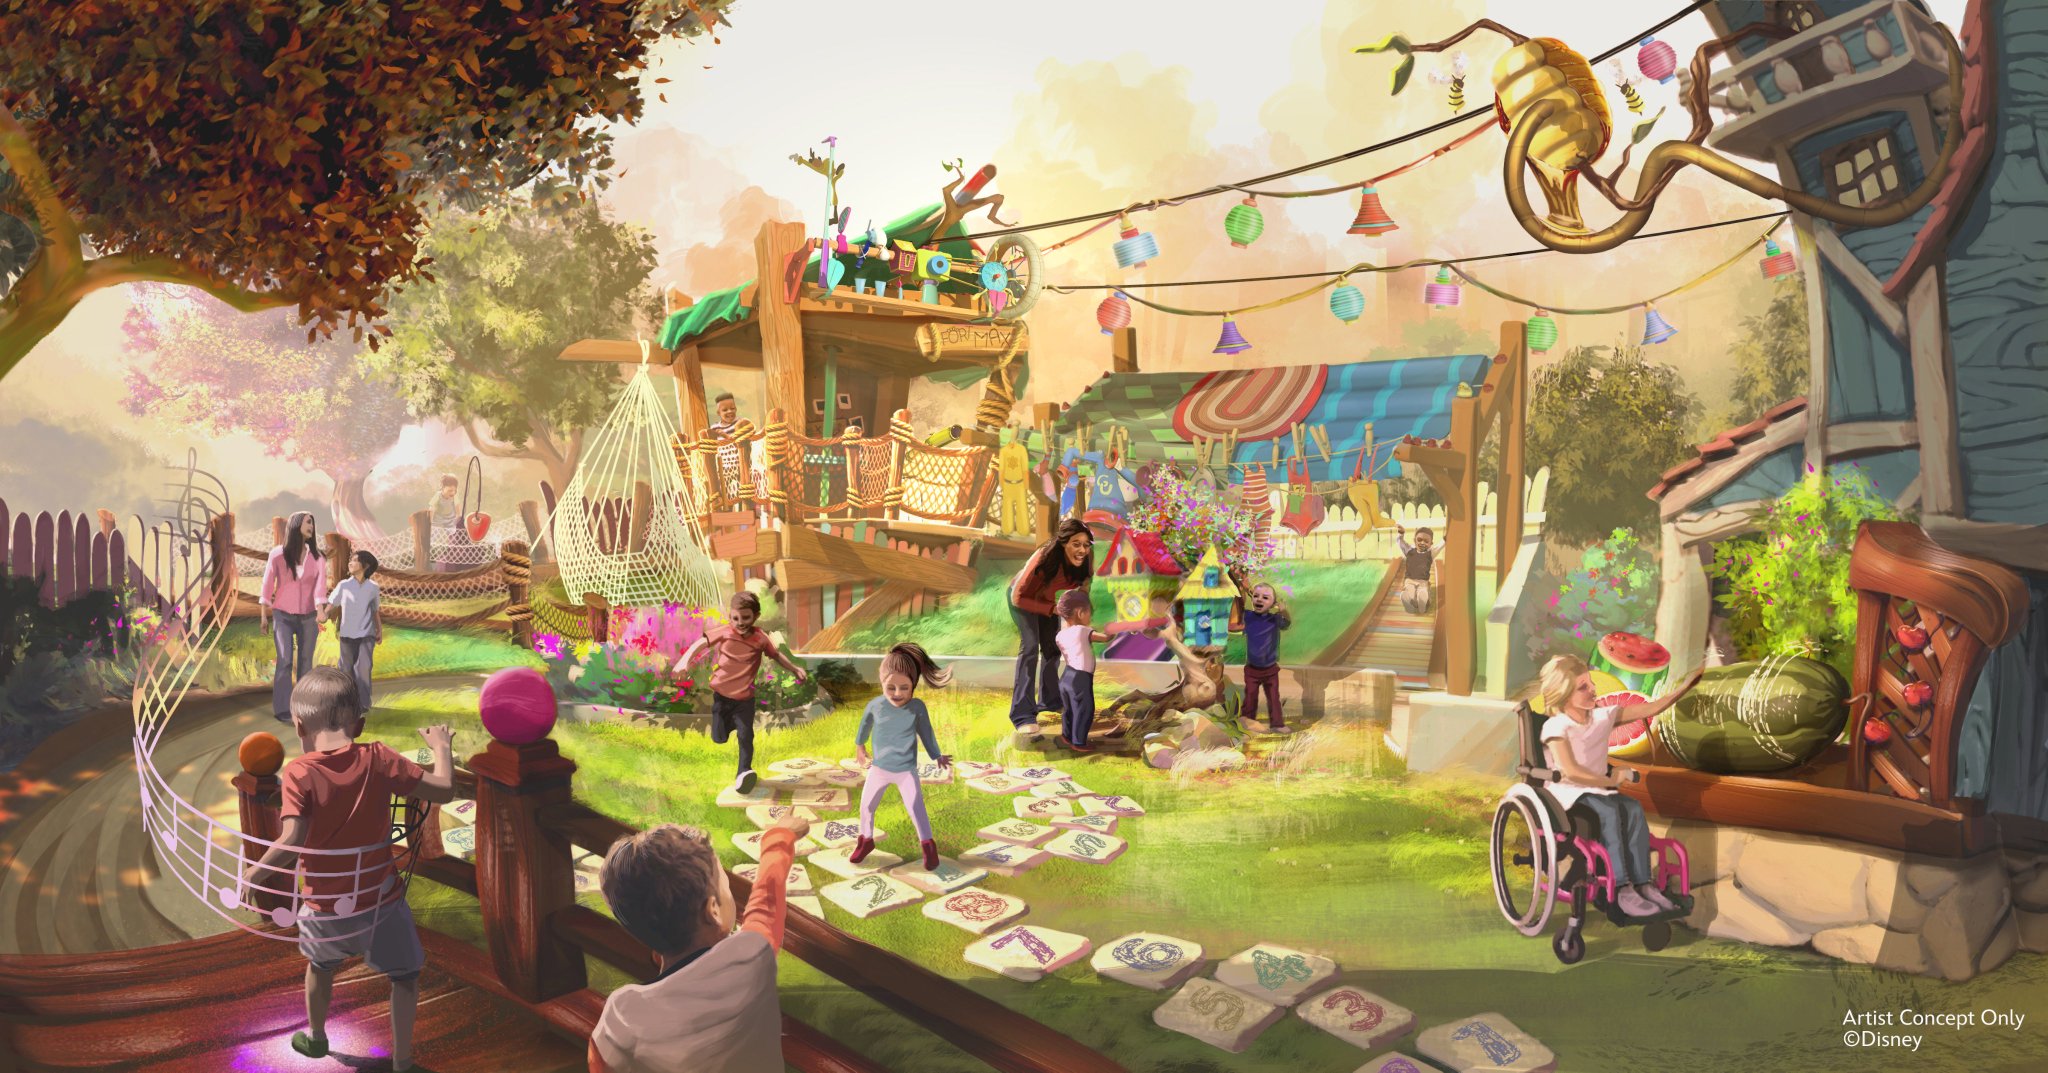 New Look at ‘Mickey’s ToonTown’ Reimagining Revealed at D23 Expo